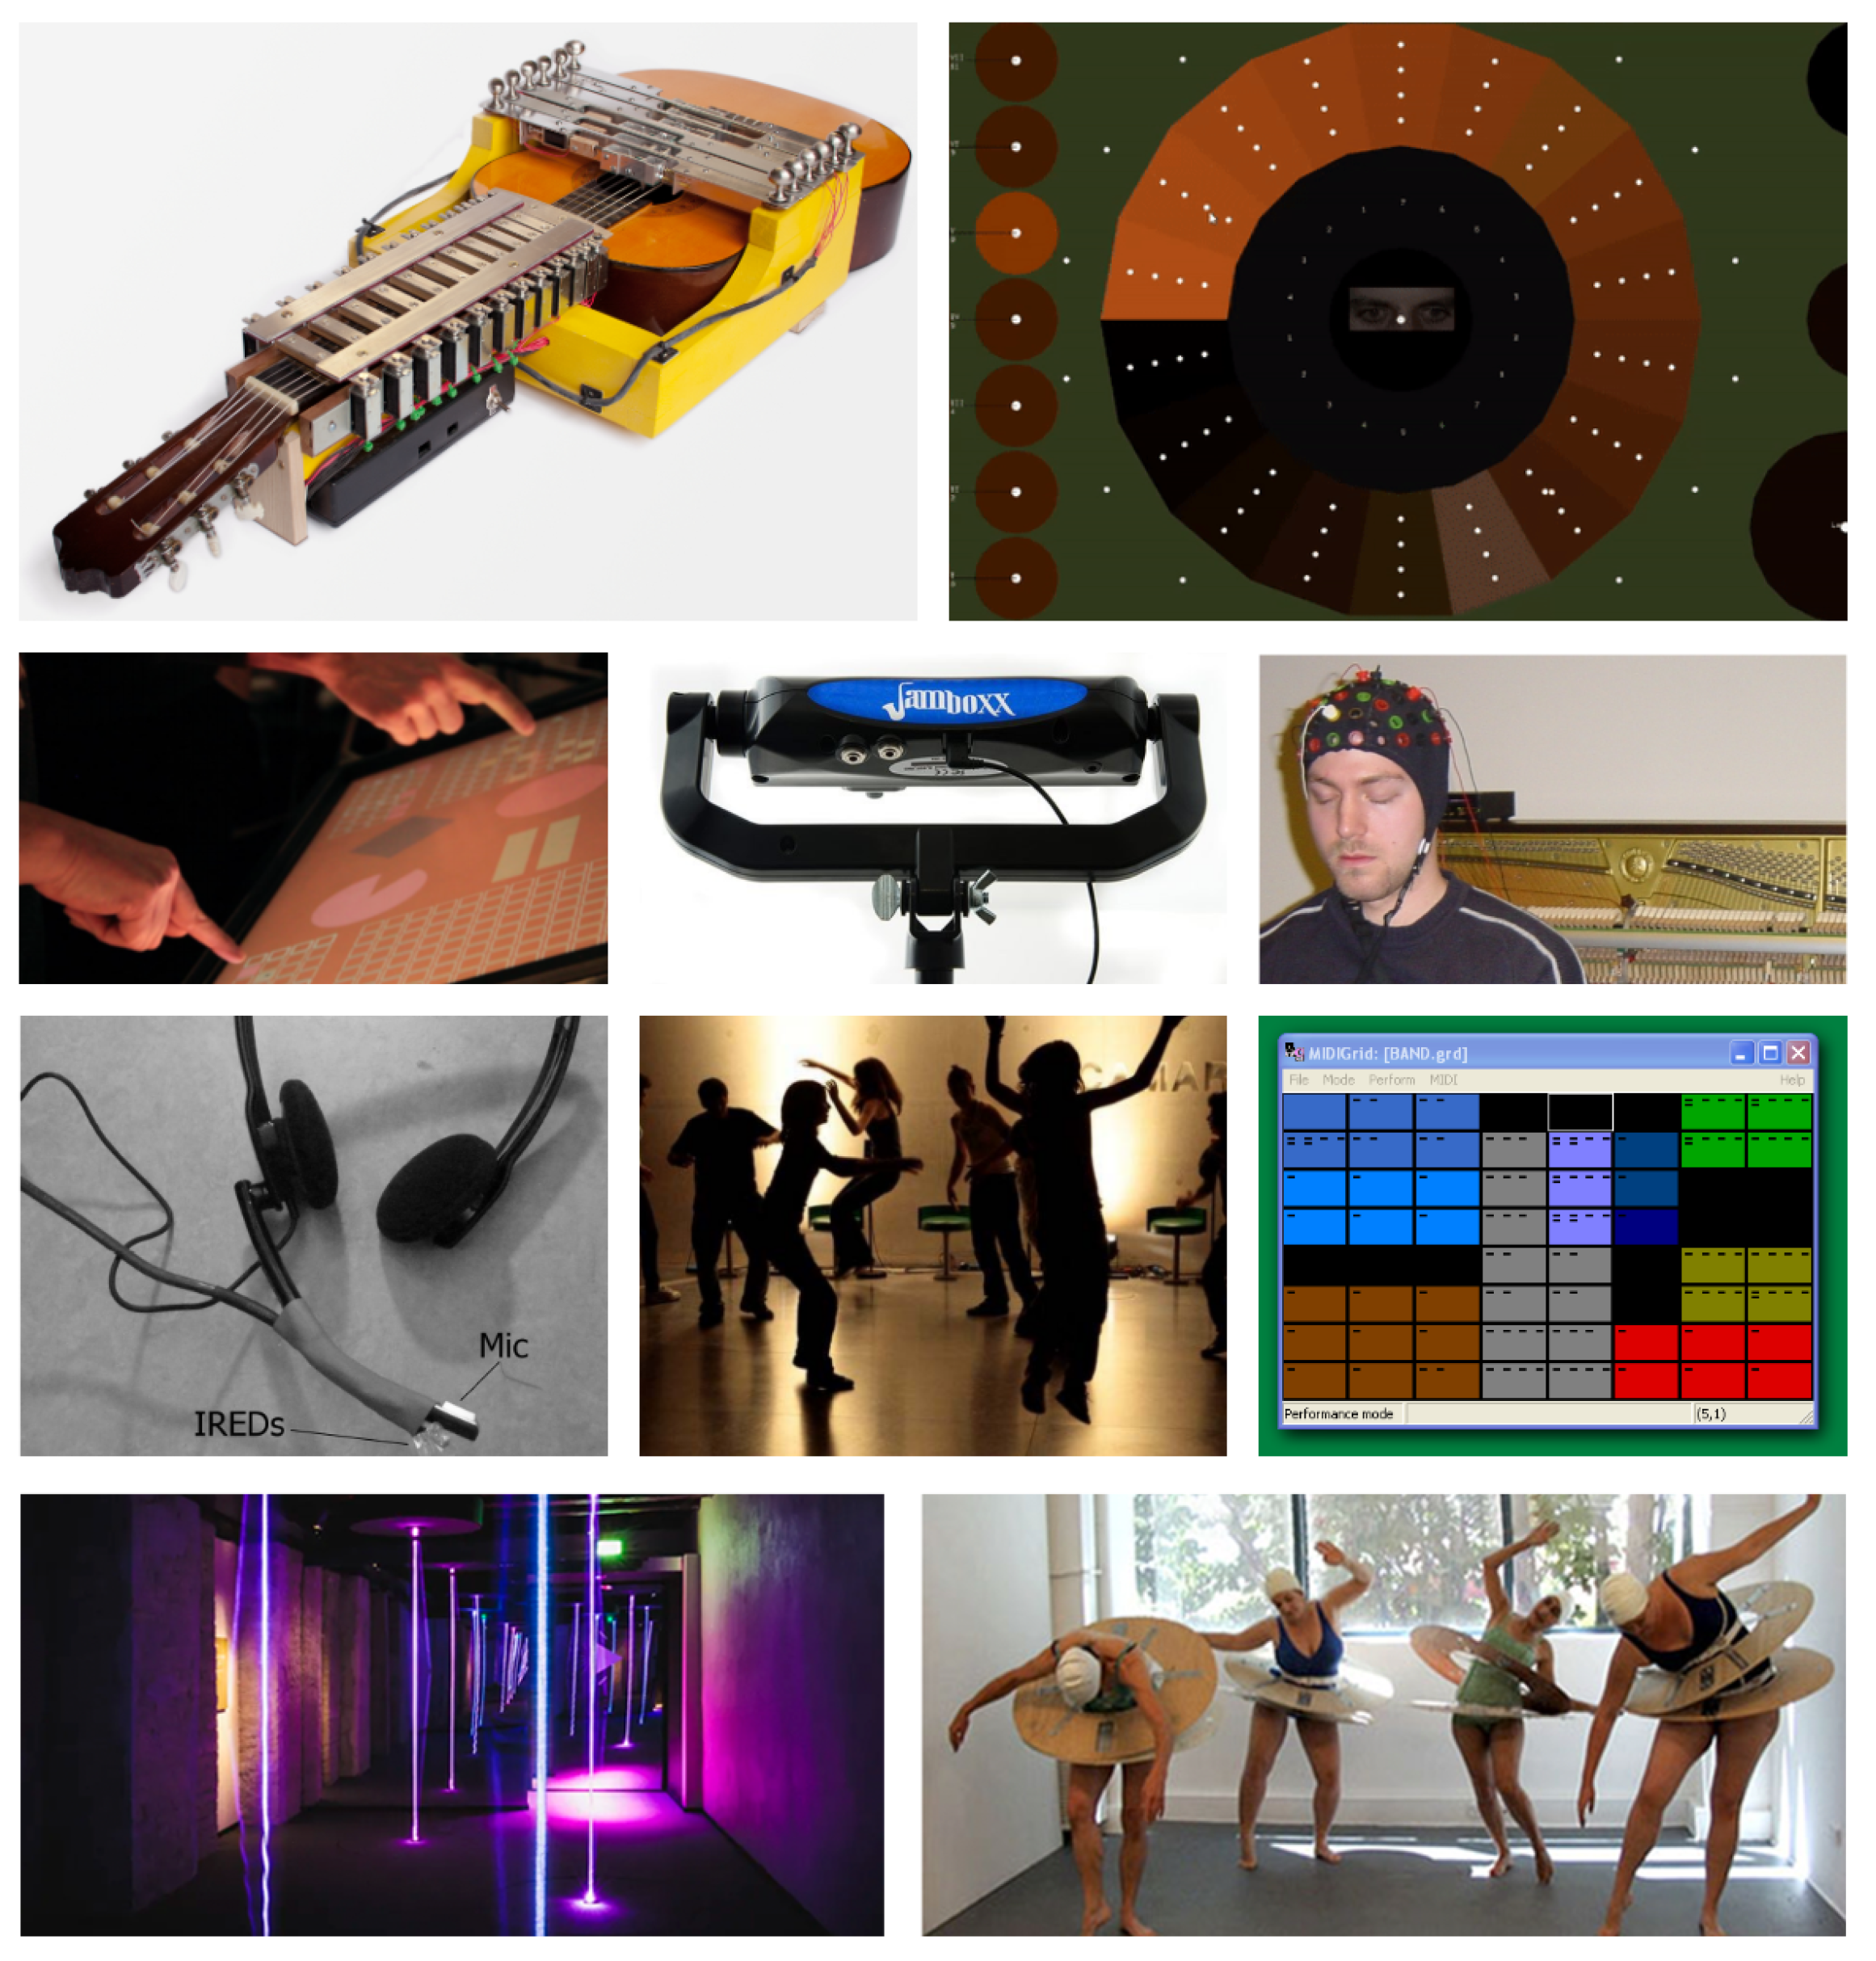 Image detail for -Percussion Instruments  Percussion instruments,  Percussion musical instruments, Musical instruments